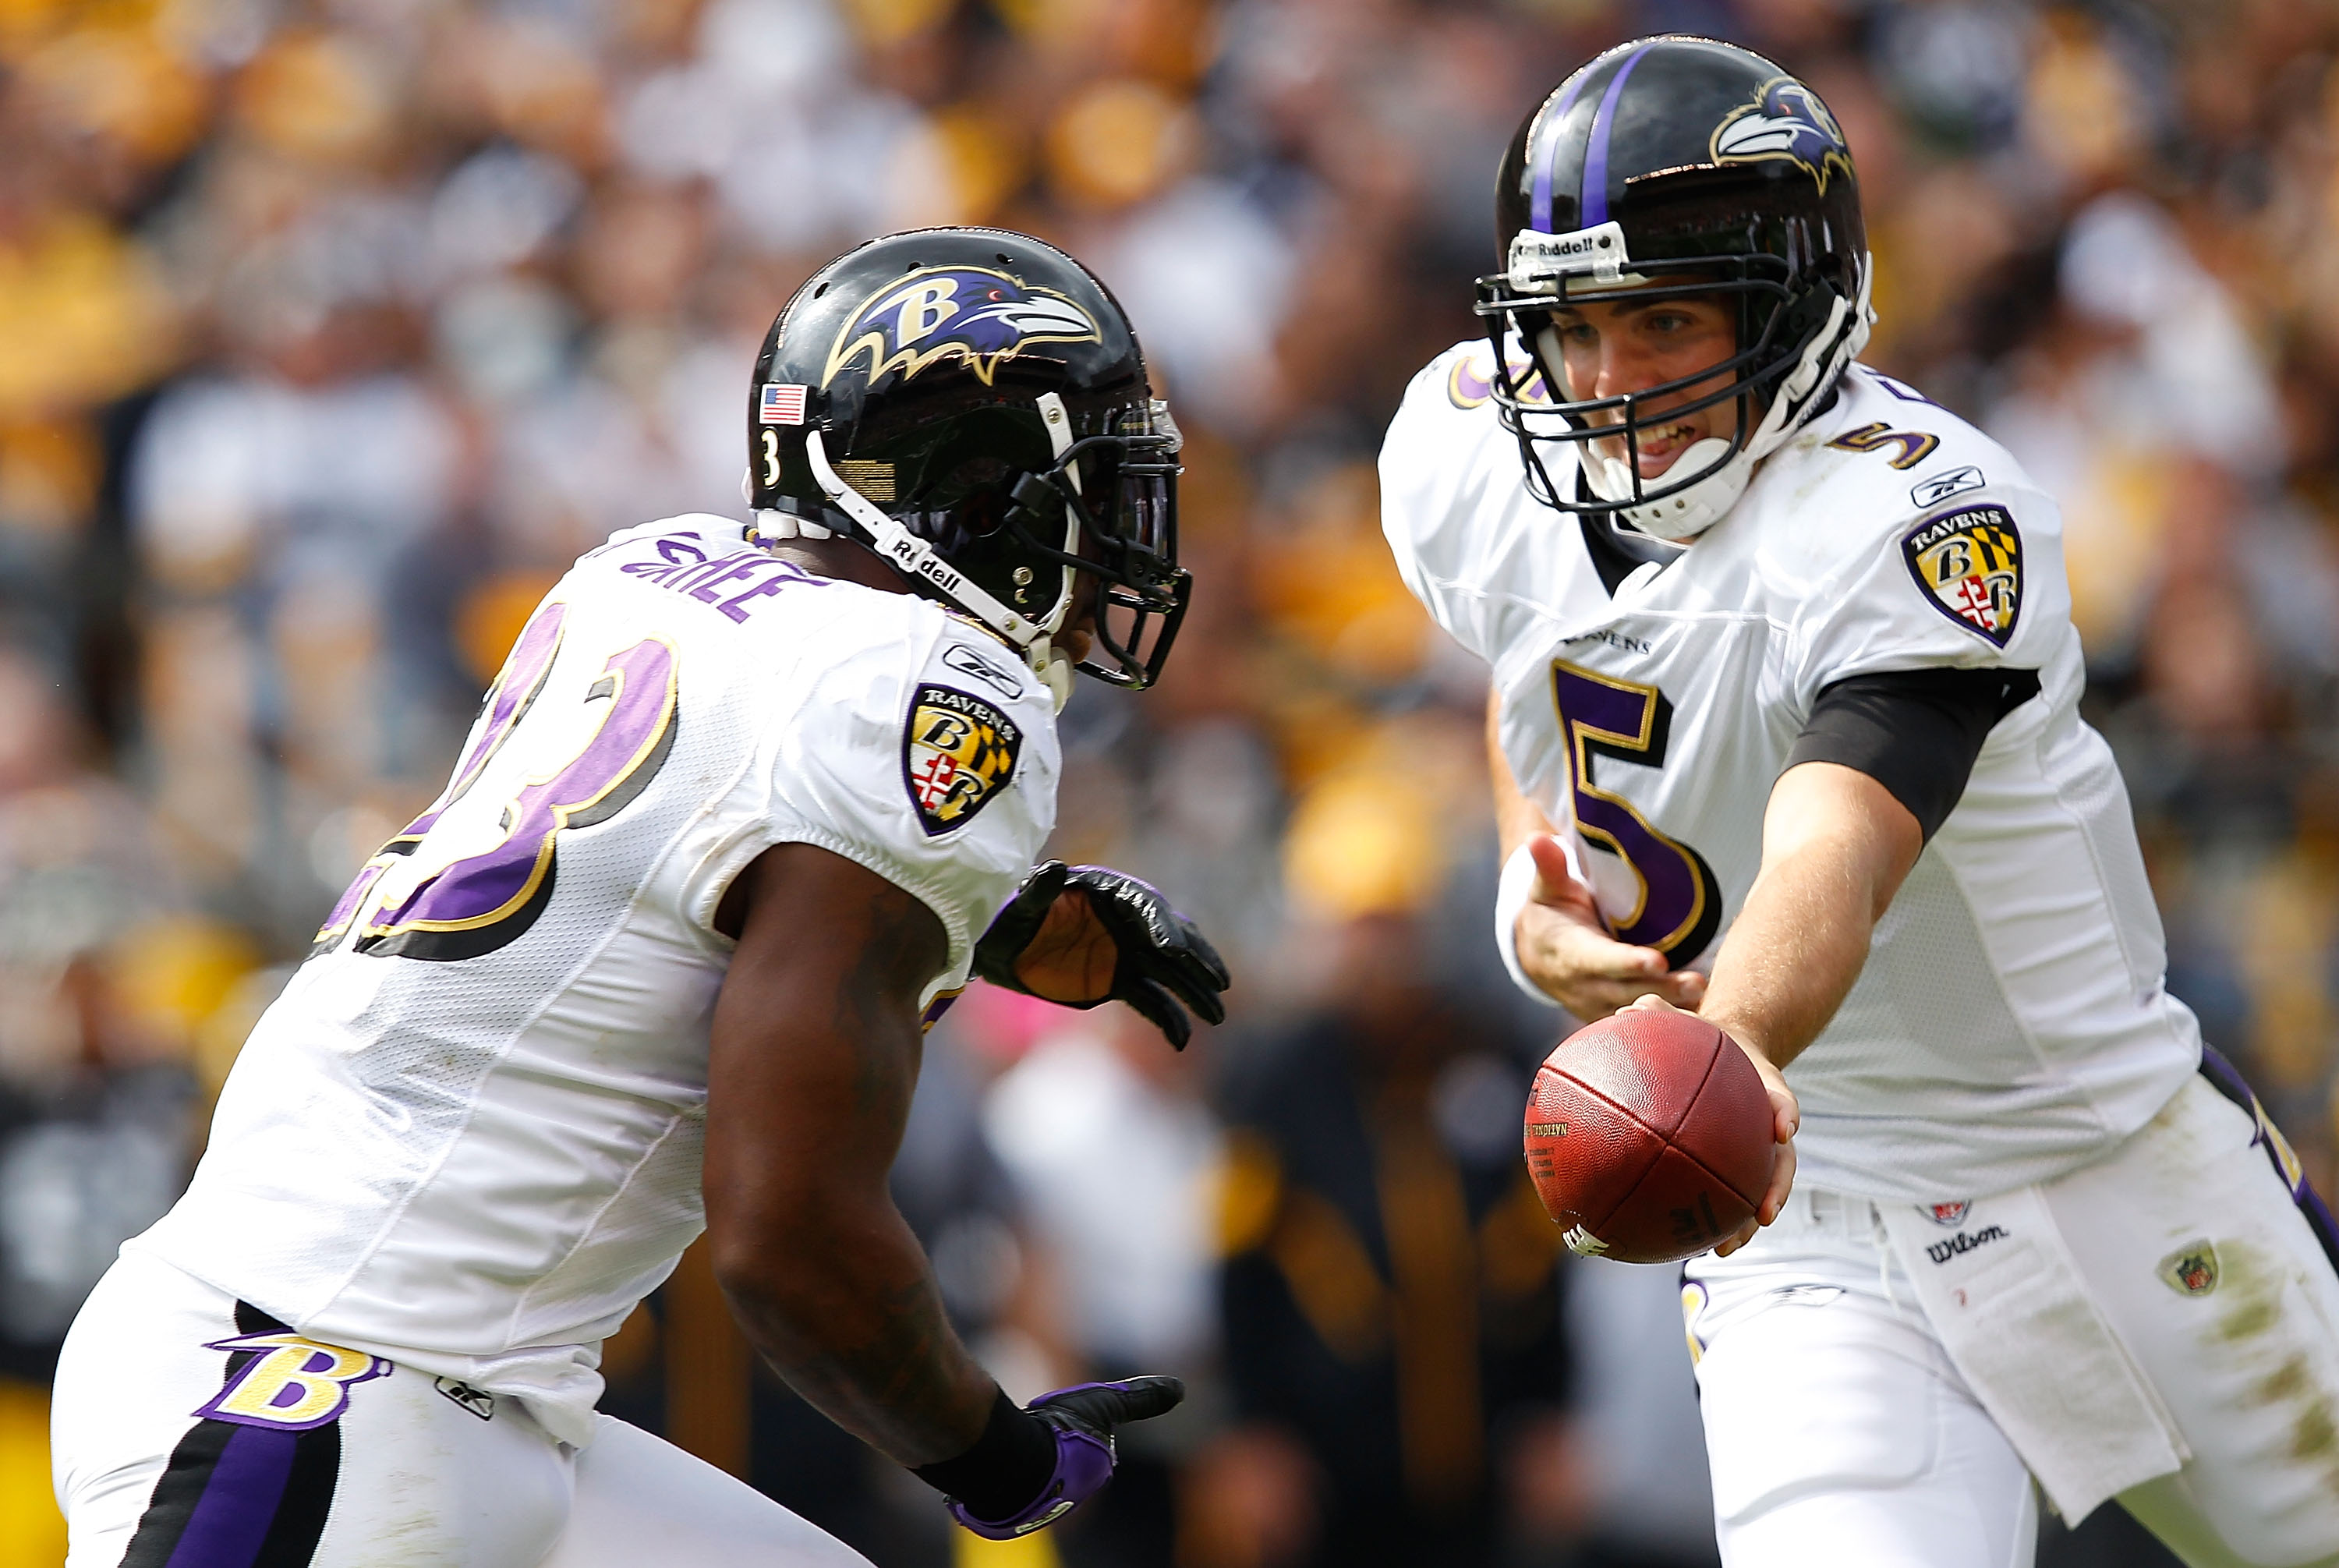 PITTSBURGH - OCTOBER 03:  Joe Flacco #5 of the Baltimore Ravens hands the ball off to teammate Willis McGahee #23 during the game against the Pittsburgh Steelers on October 3, 2010 at Heinz Field in Pittsburgh, Pennsylvania.  (Photo by Jared Wickerham/Get